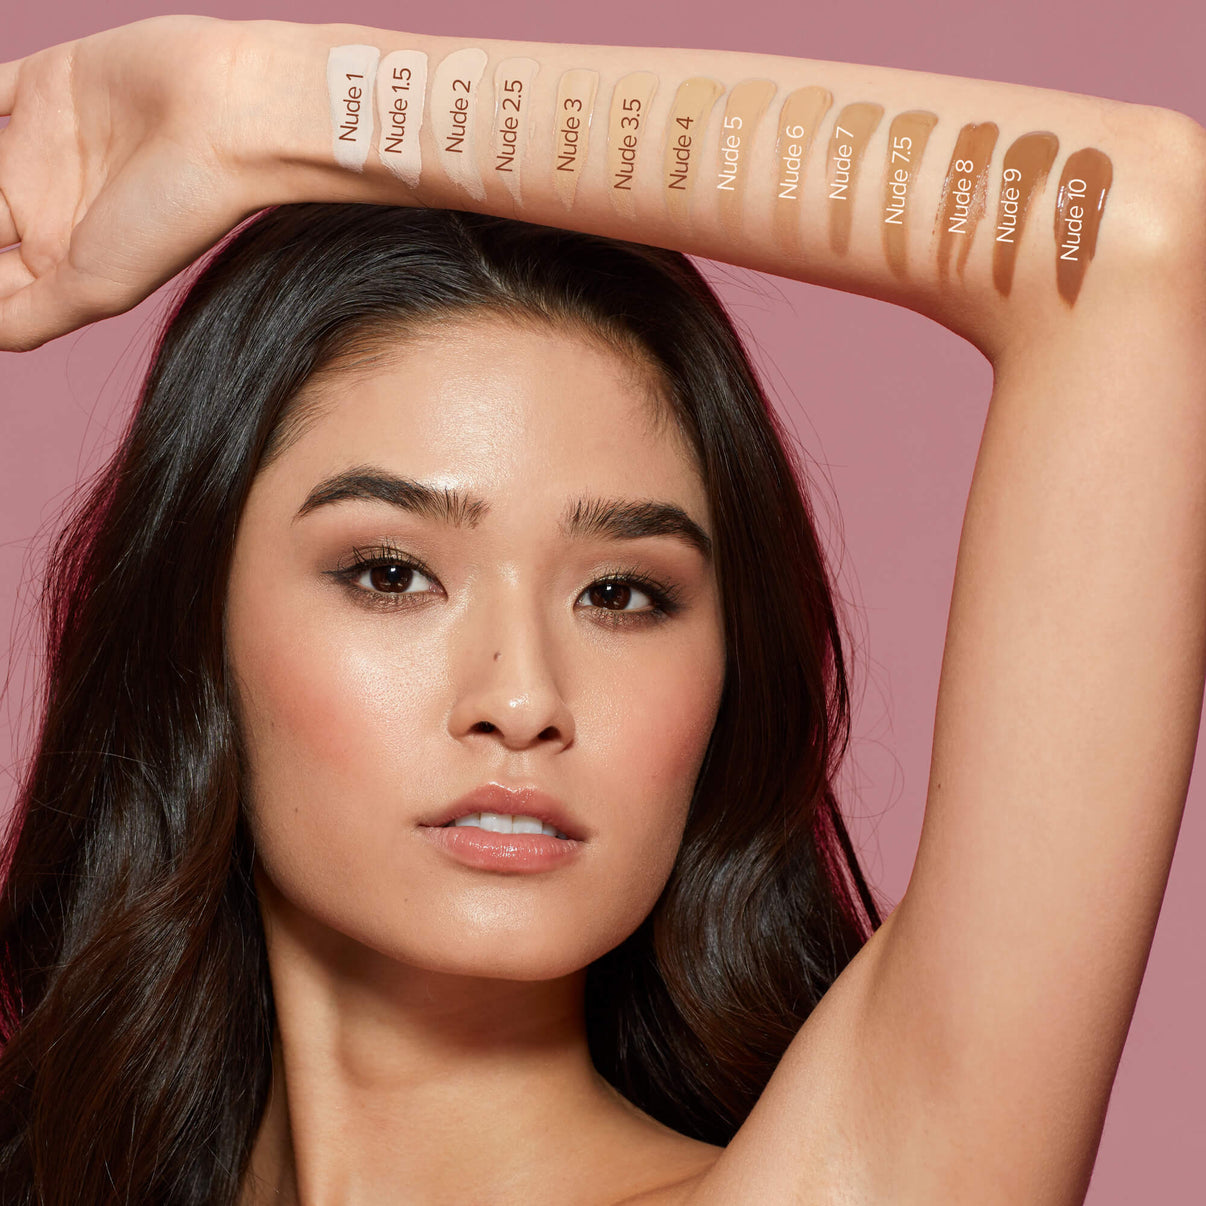 Young woman with swatches on her arm of Tinted Cover nude 7 and other shades